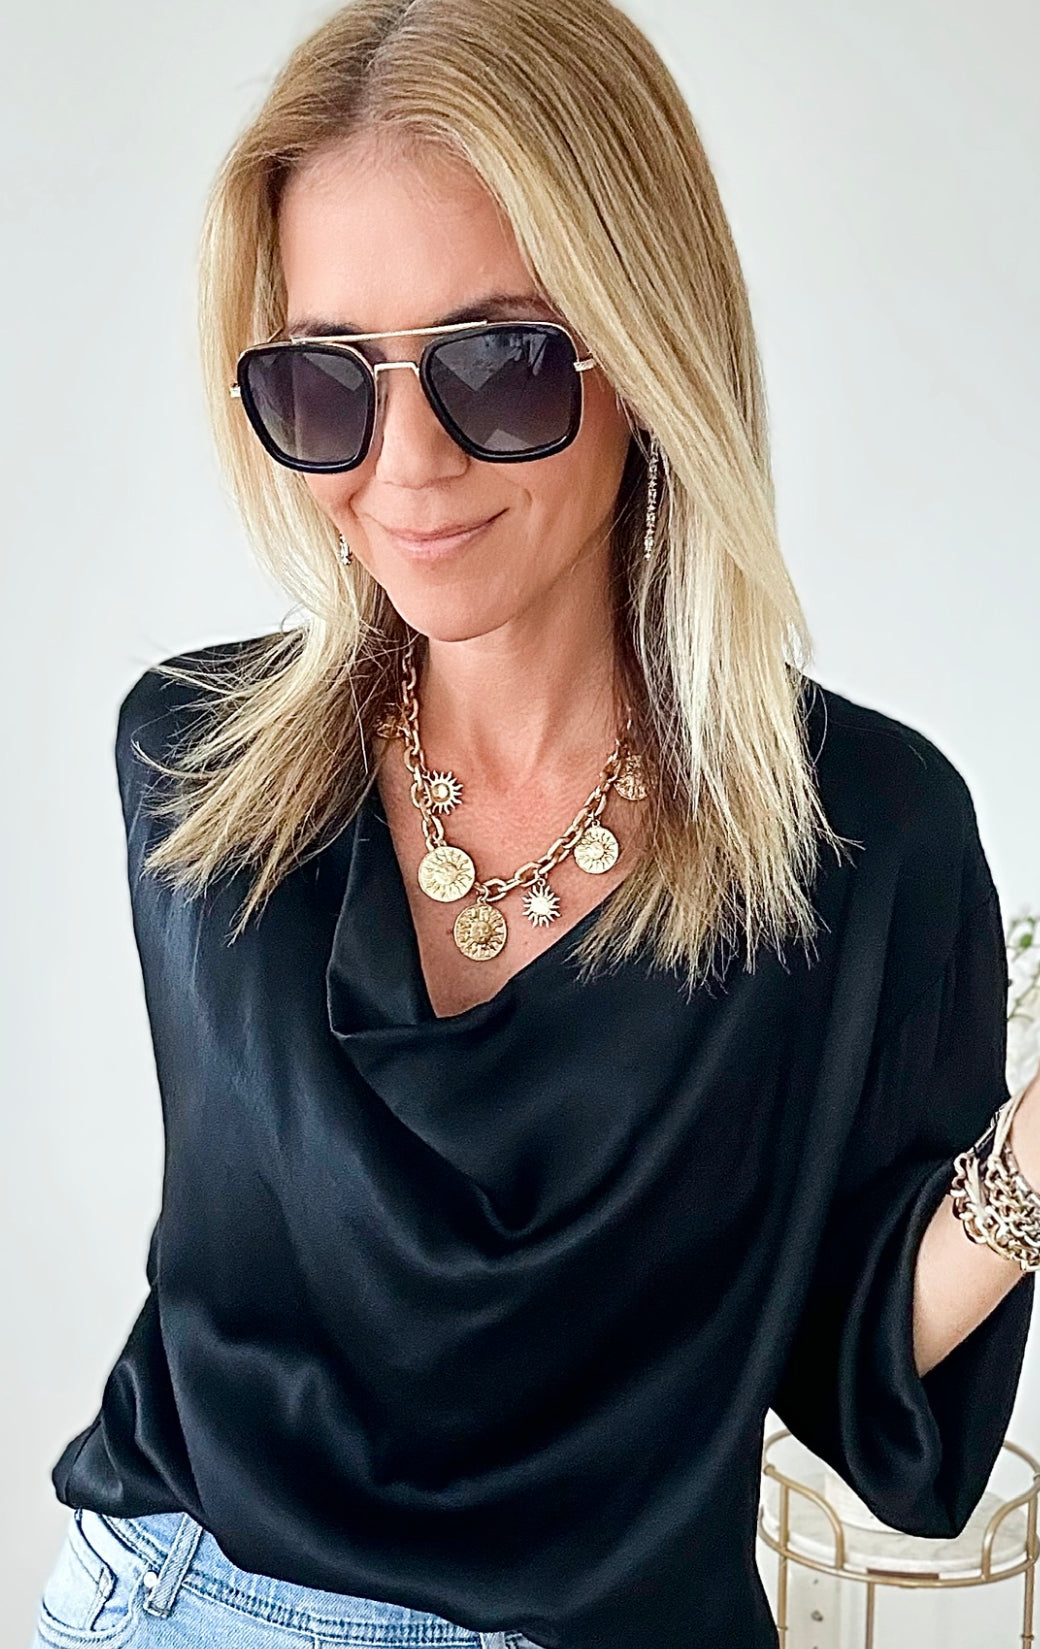 Sunset Aviators Sunglasses-Black and Gold-260 Other Accessories-AMAZON/CBALY-Coastal Bloom Boutique, find the trendiest versions of the popular styles and looks Located in Indialantic, FL